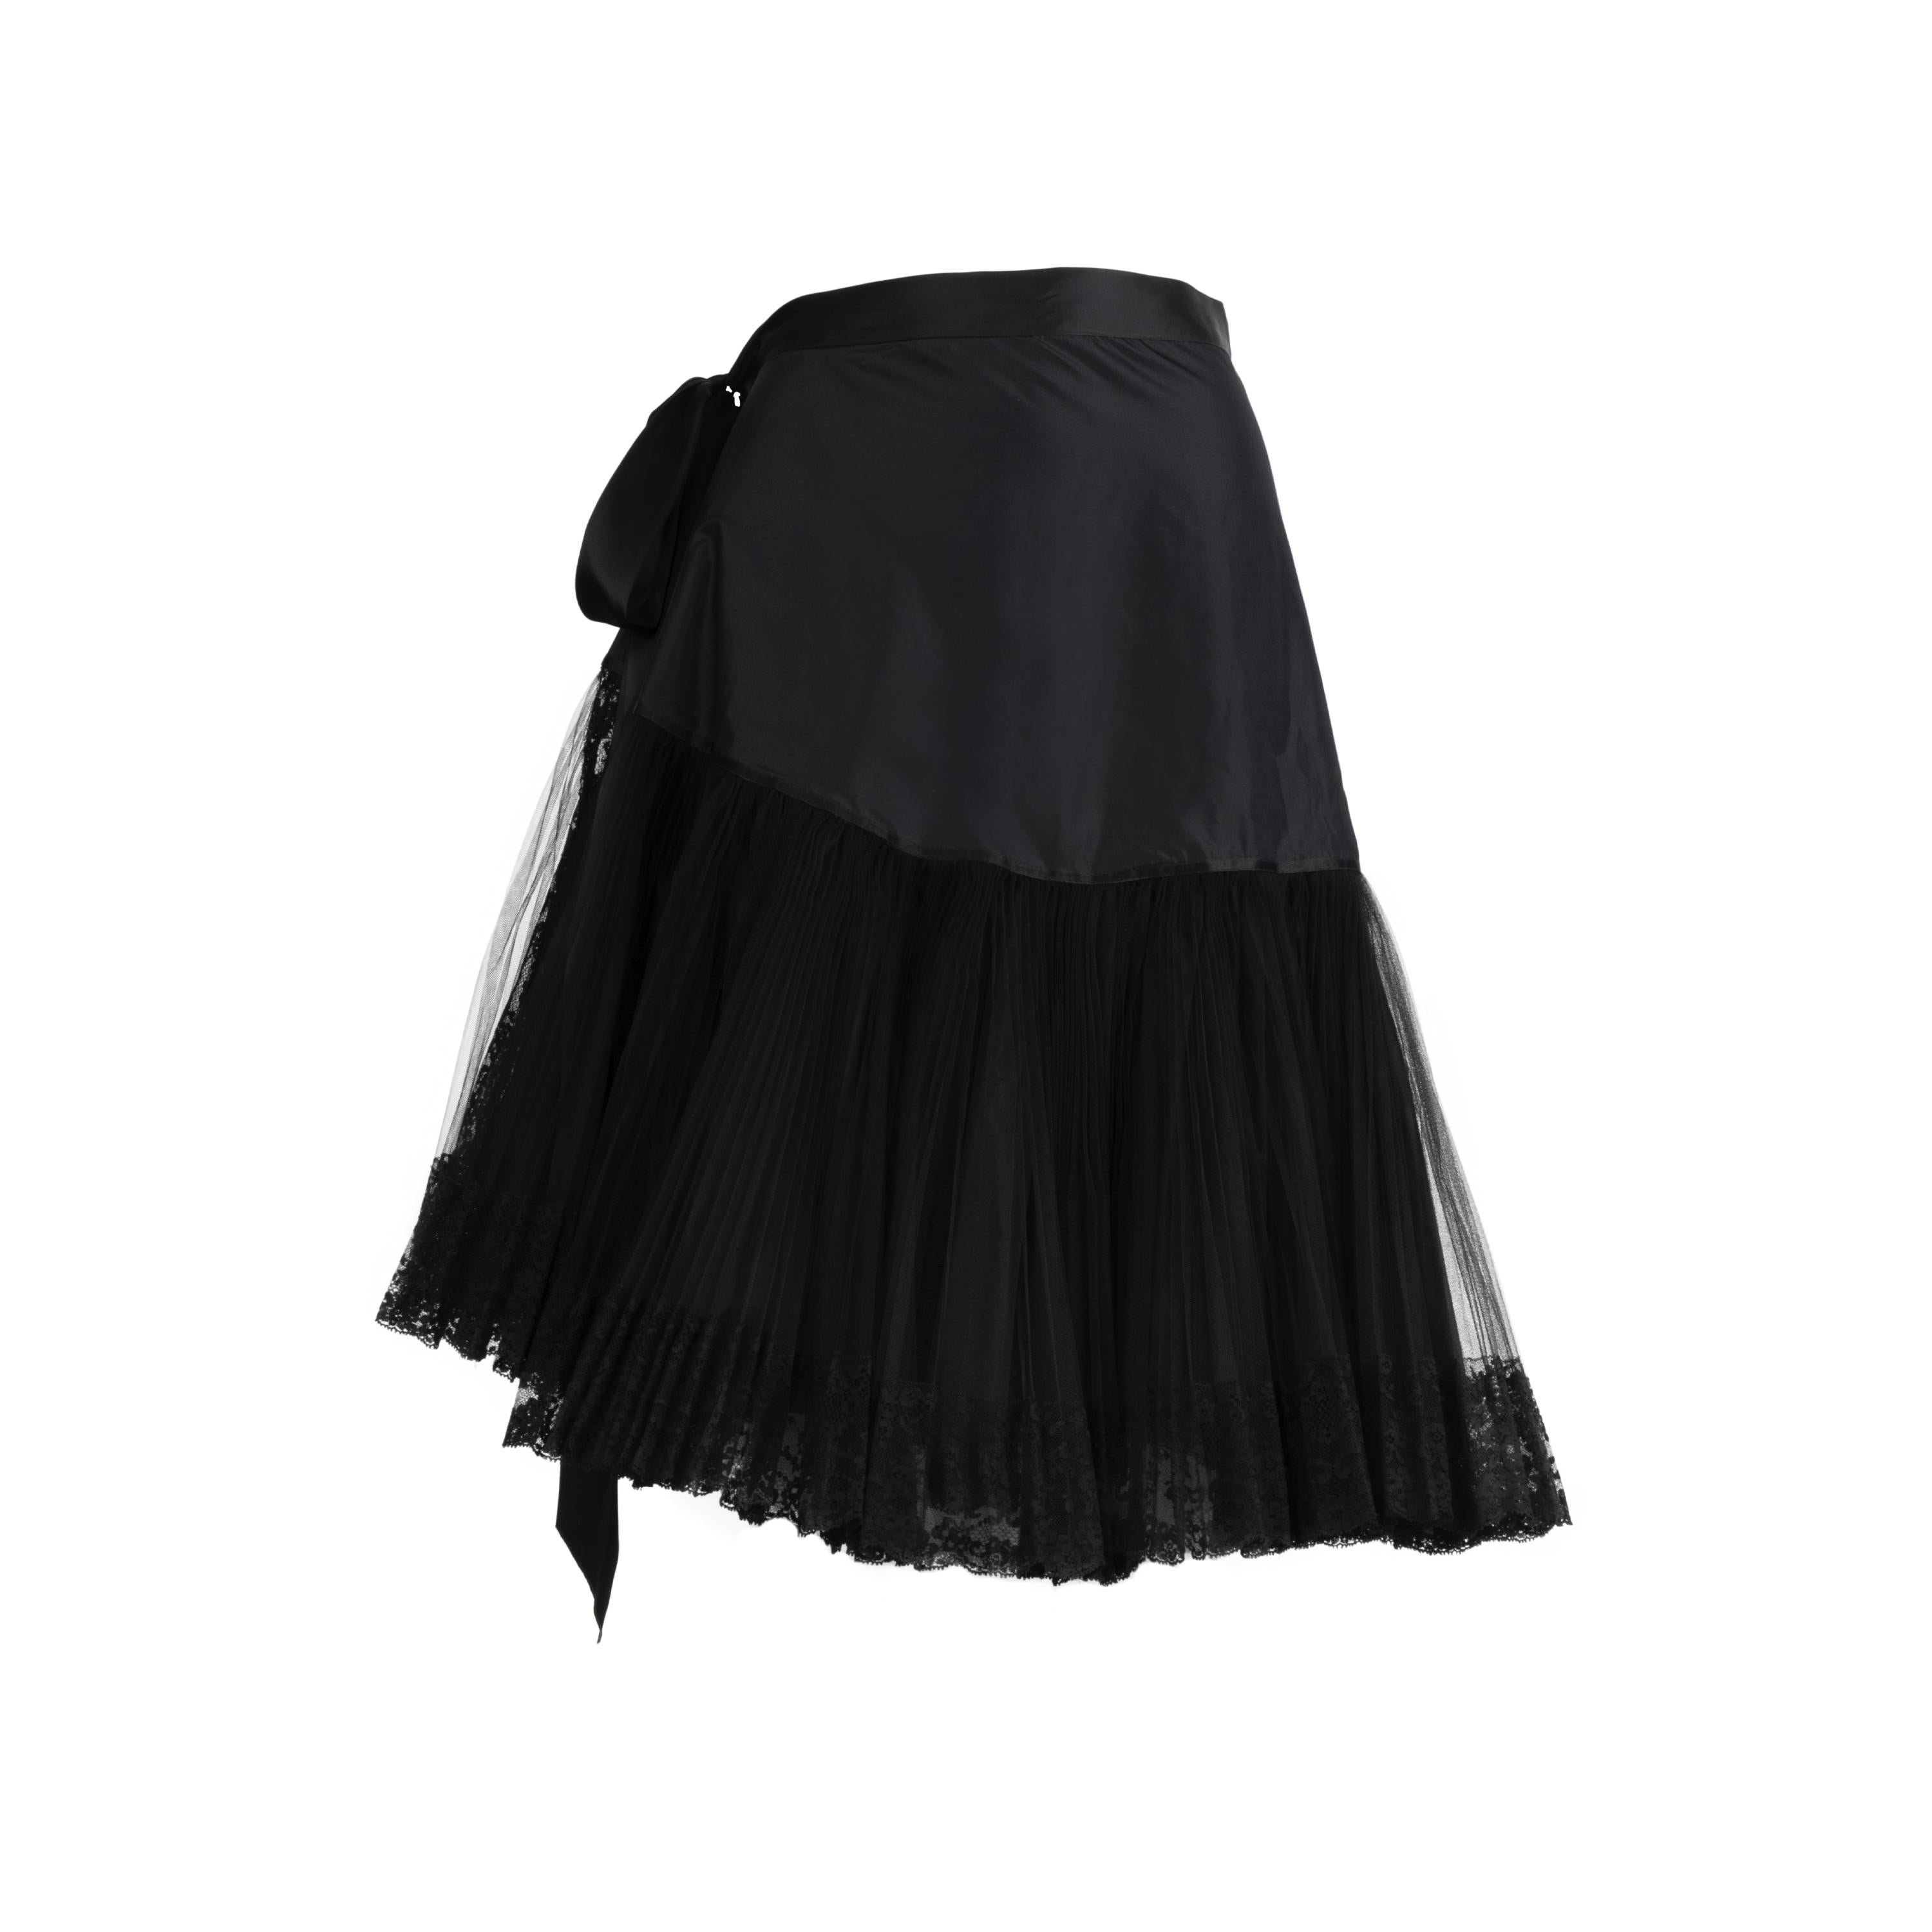 Gianfranco Ferré black skirt. Long skirt decorated with lace and tulle.